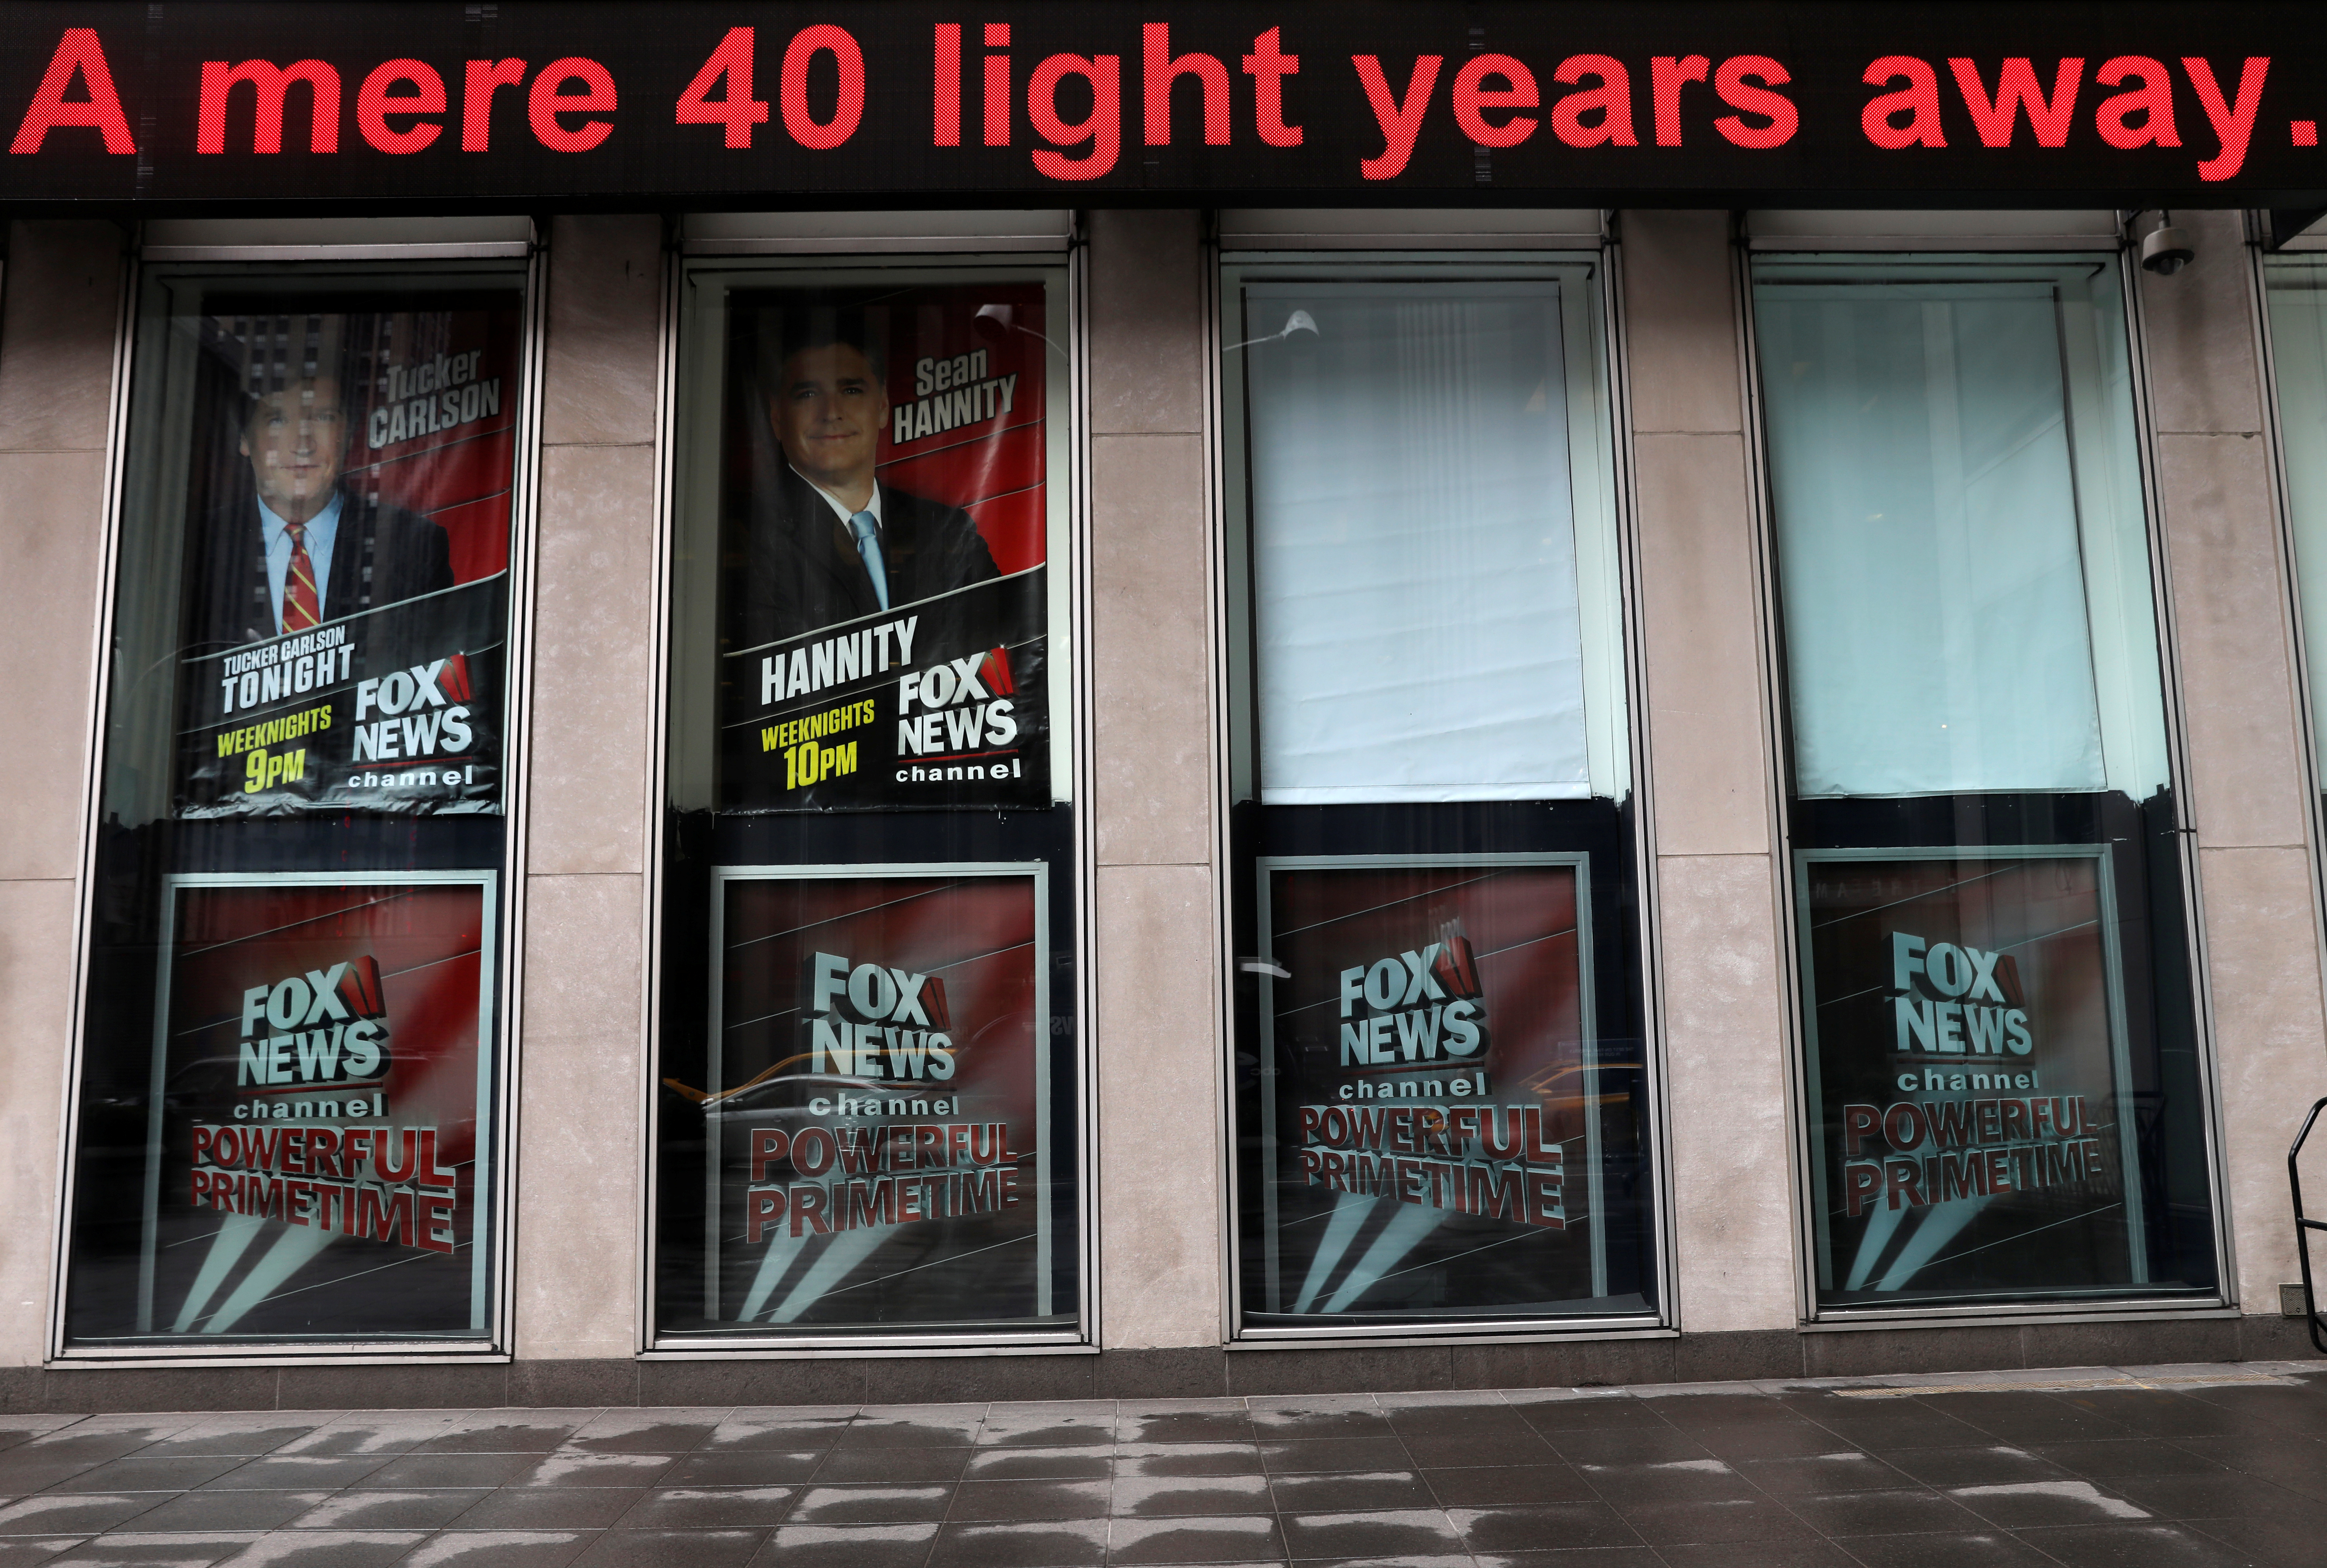 Outside the Fox News building in Manhattan.